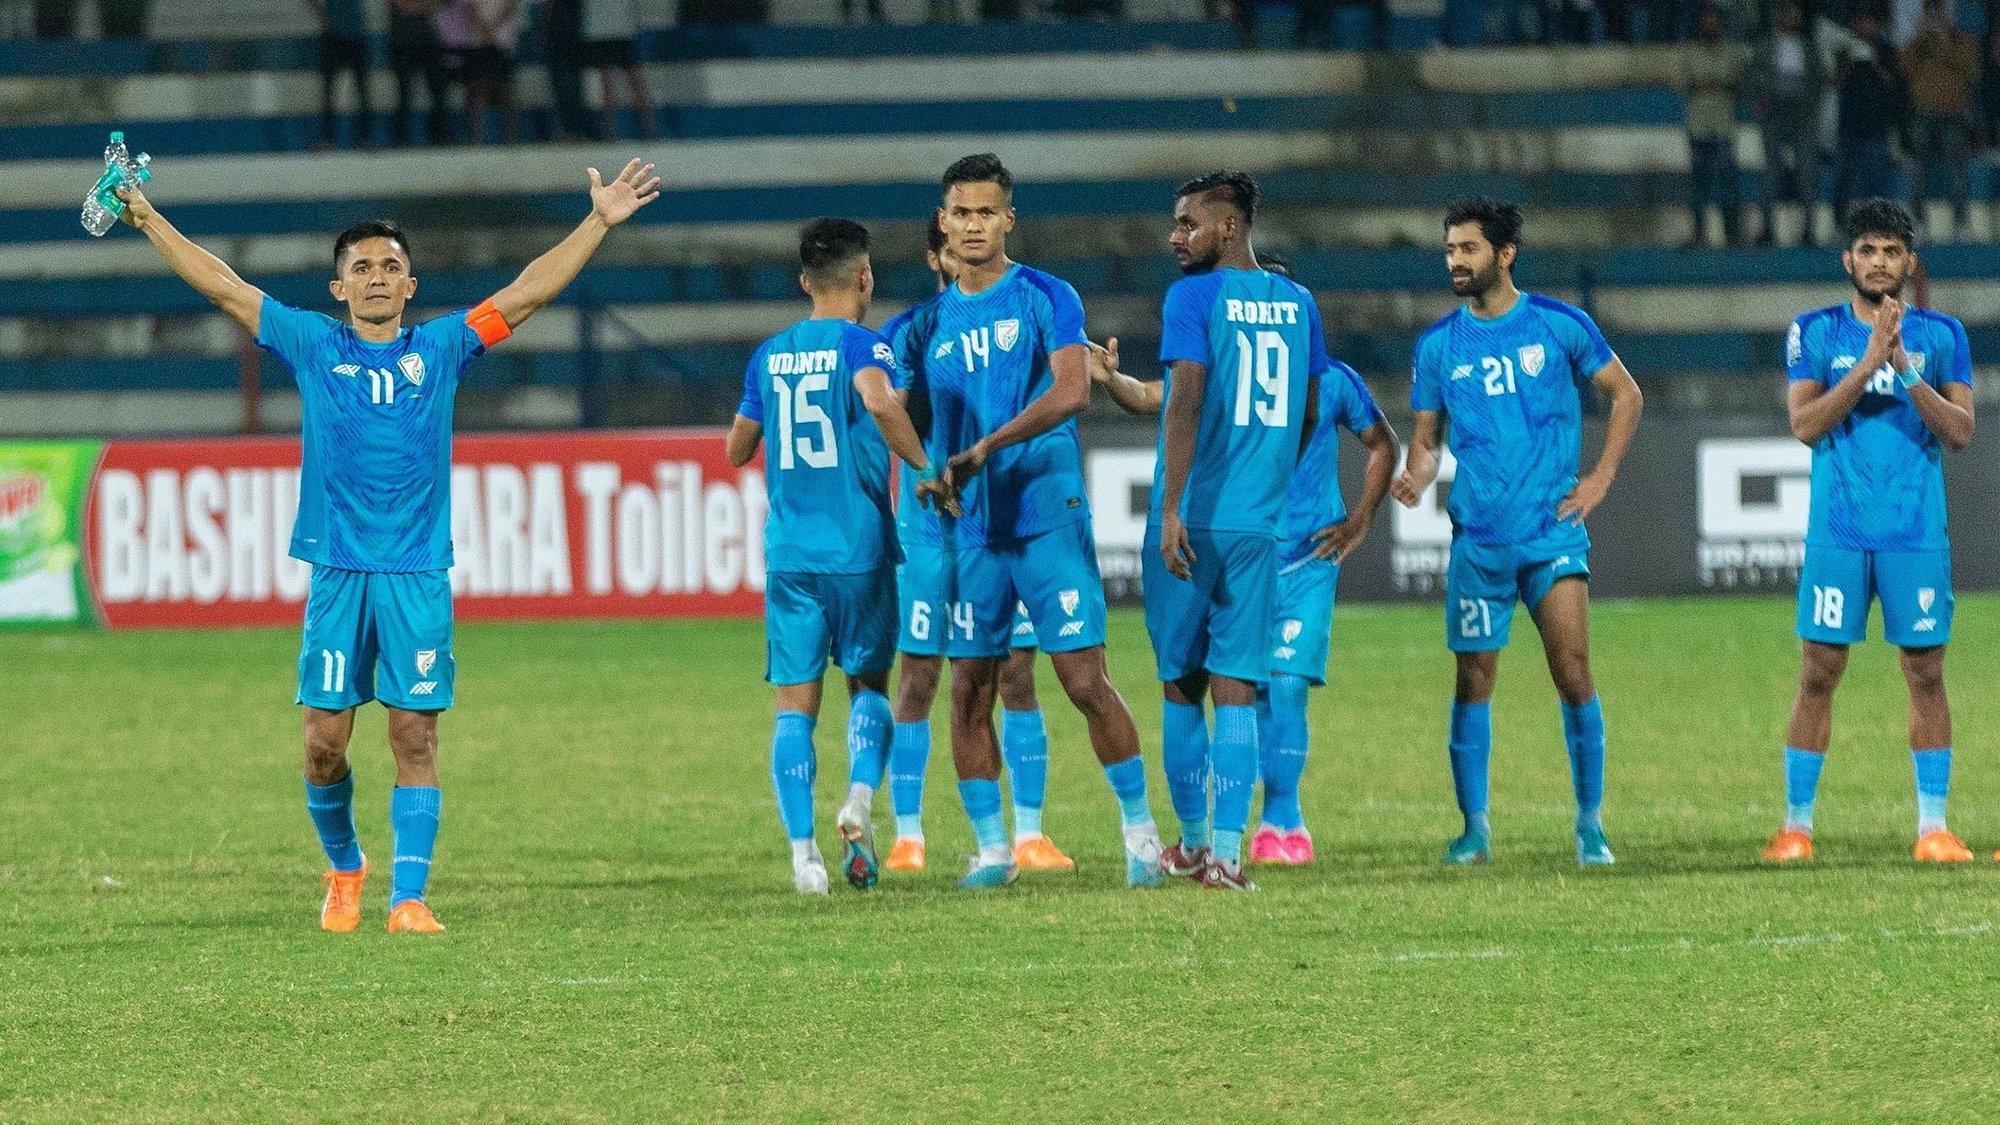 Indian Football Team will aim for a win against Roberto mancini's side in India vs Iraq Live in the King's Cup Opener on September 7